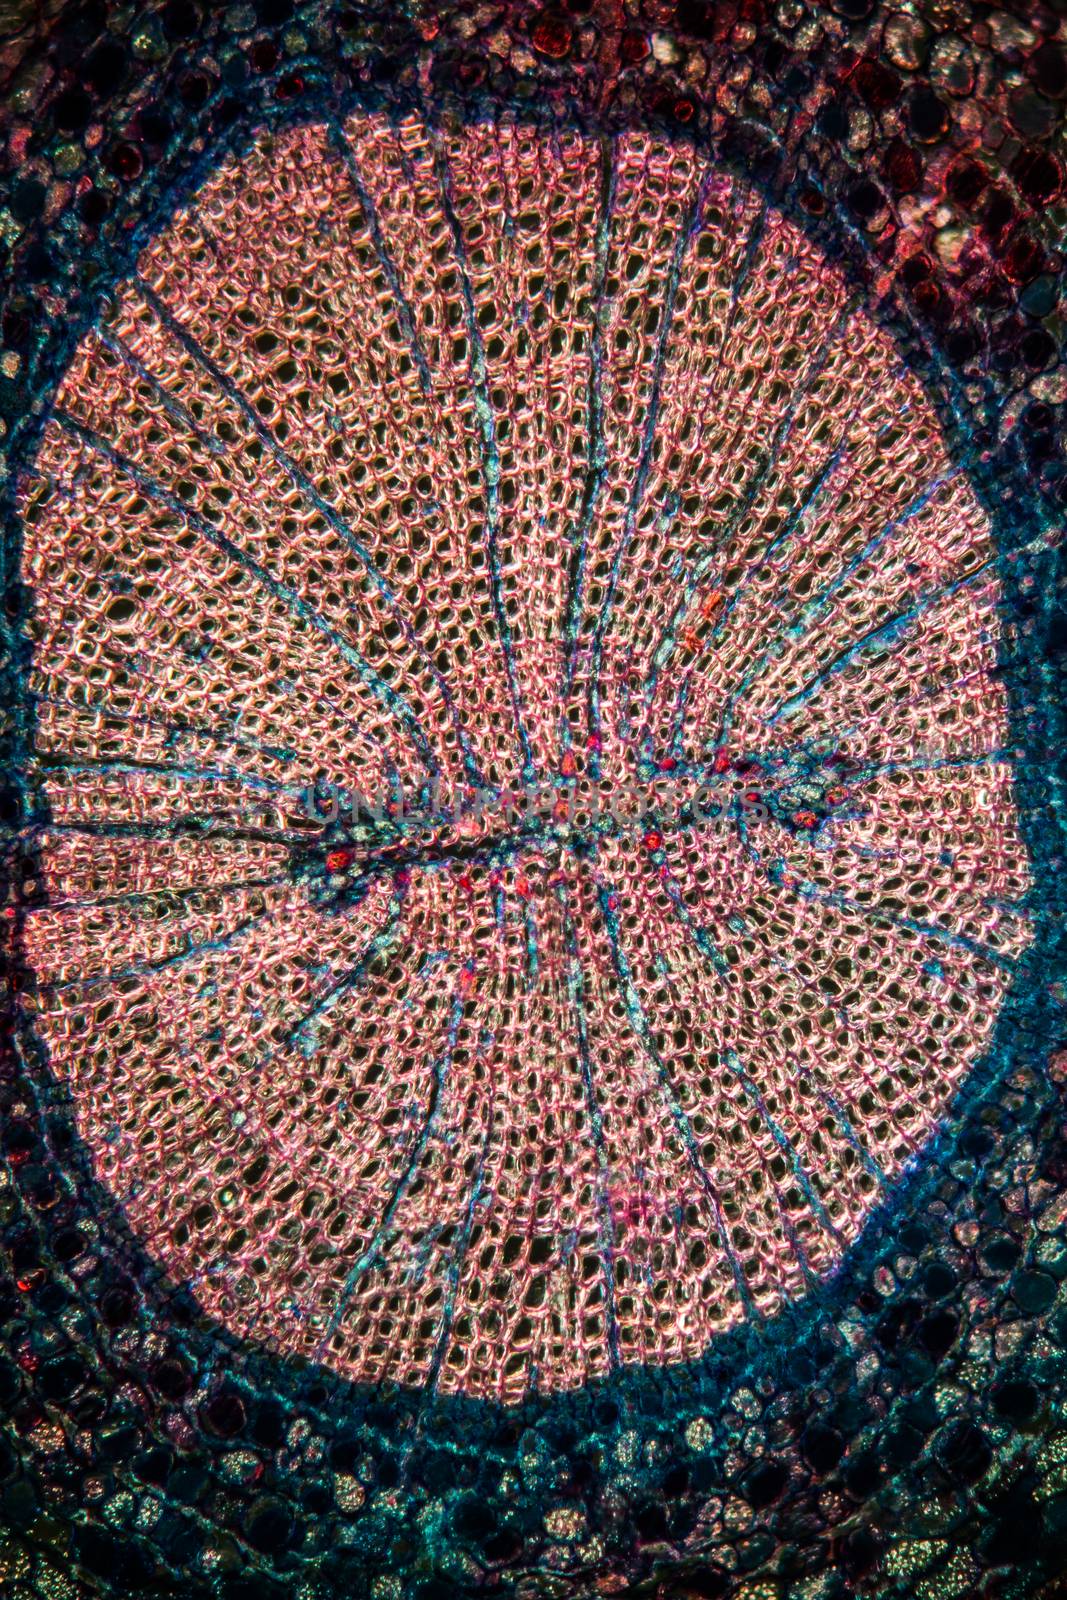 Yew root in cross section 100x